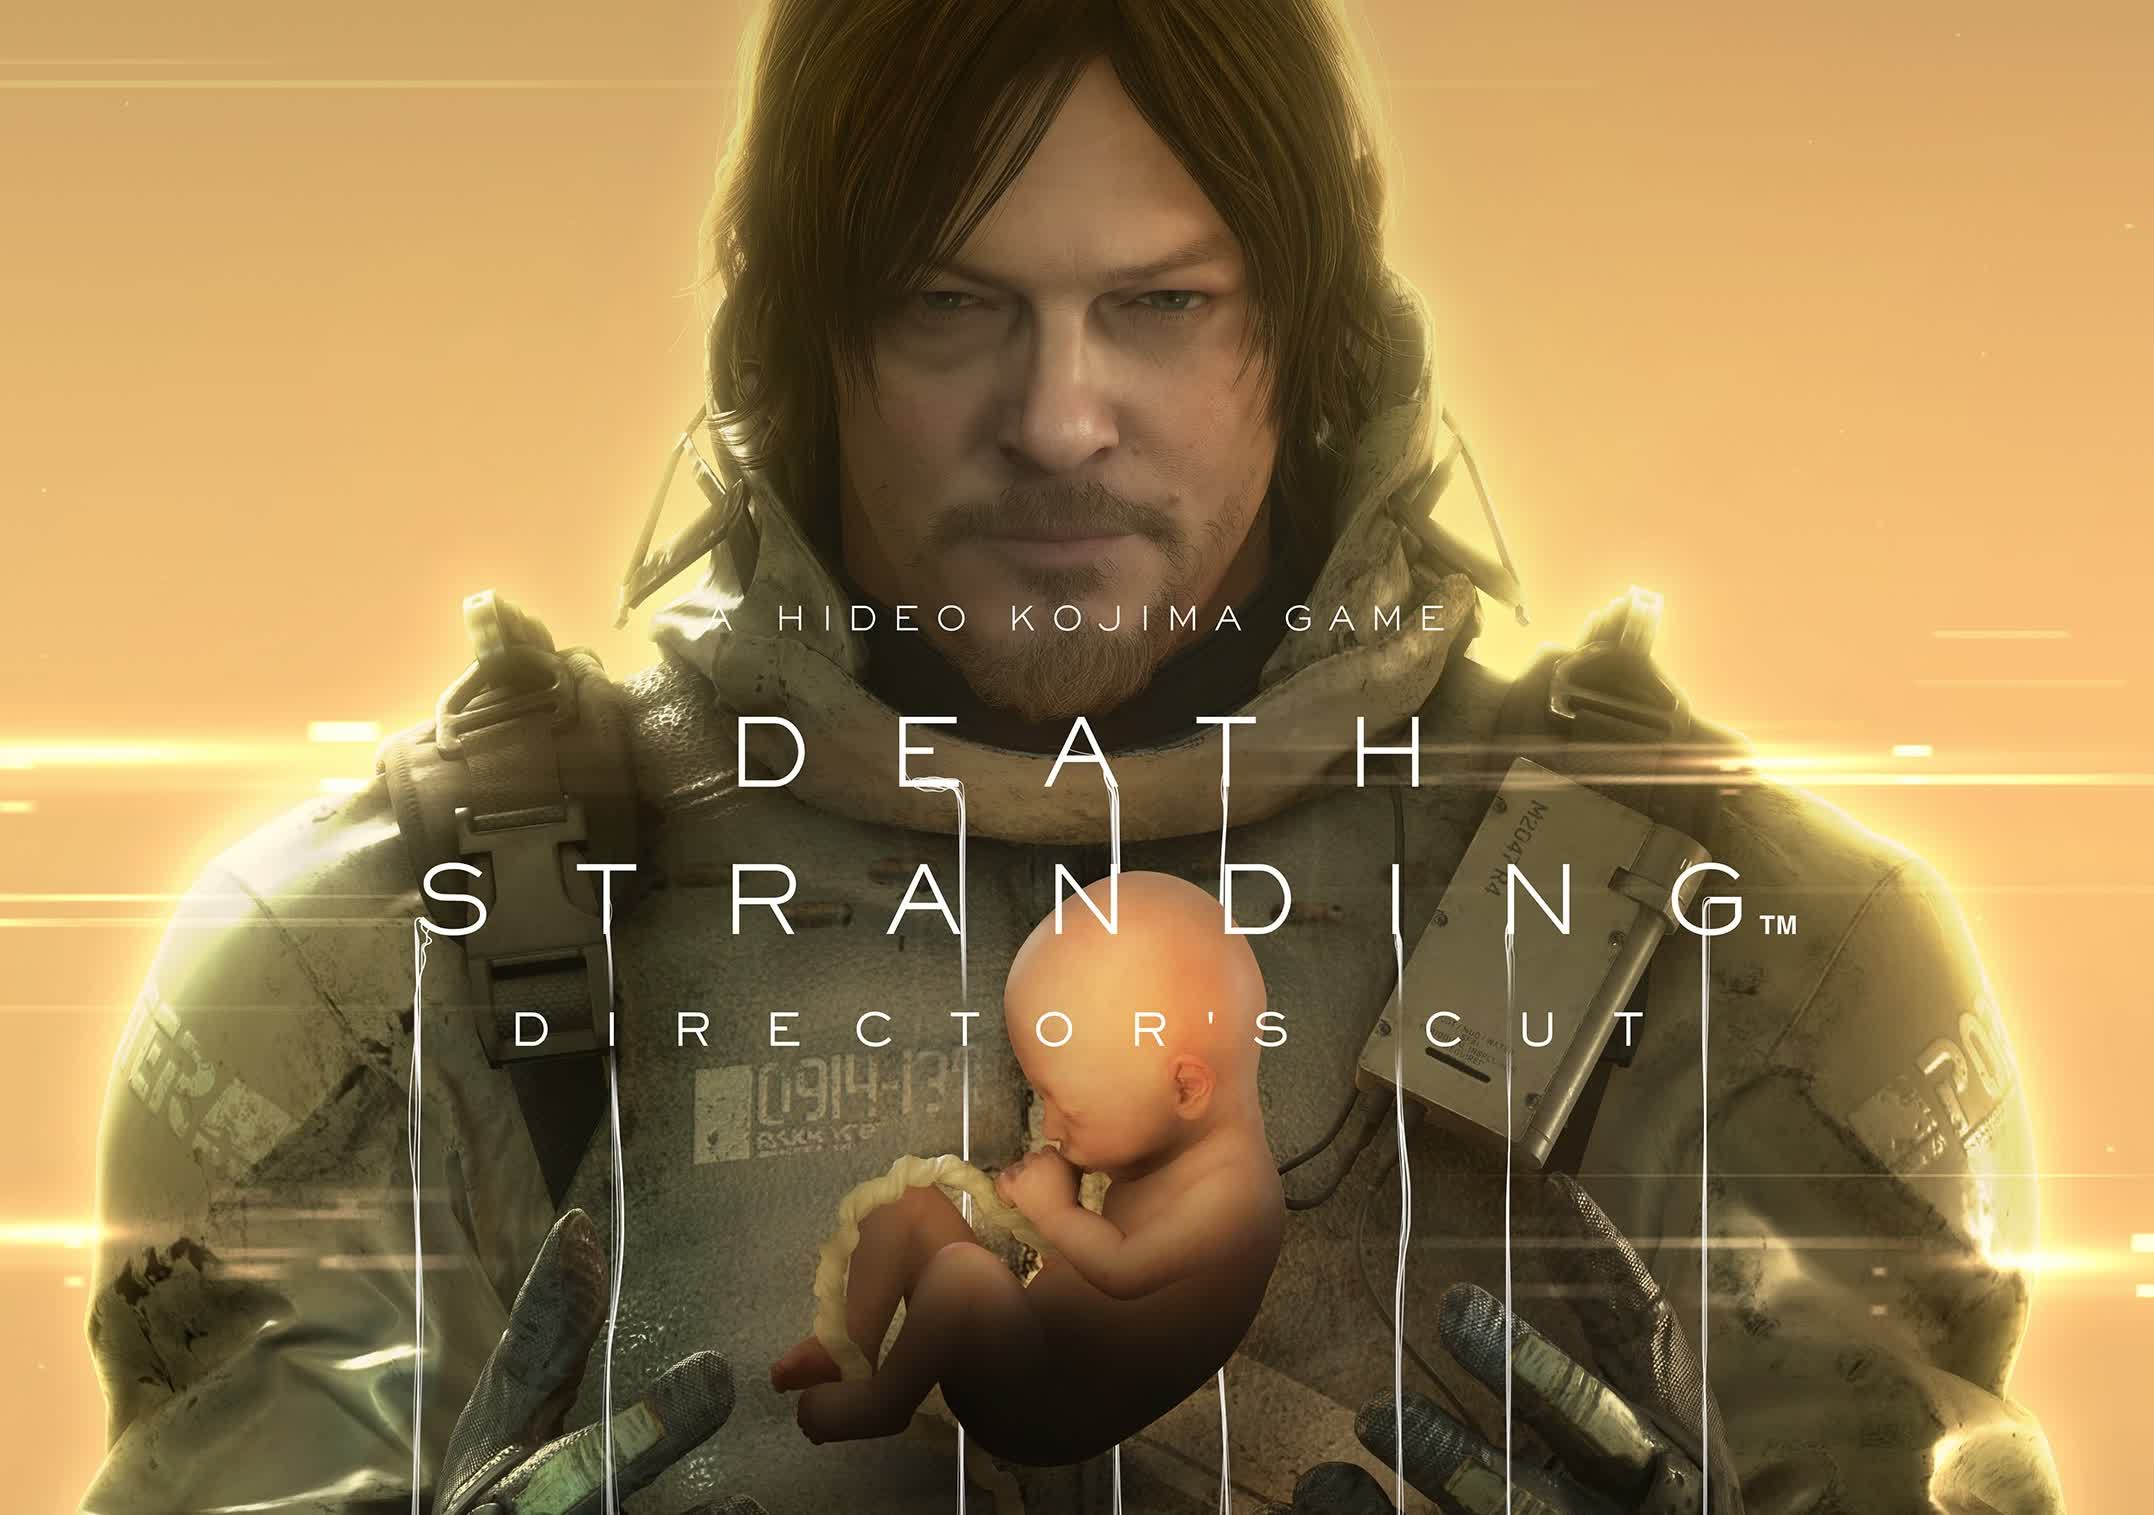 Death Stranding Director's Cut is heading to PC this spring | TechSpot